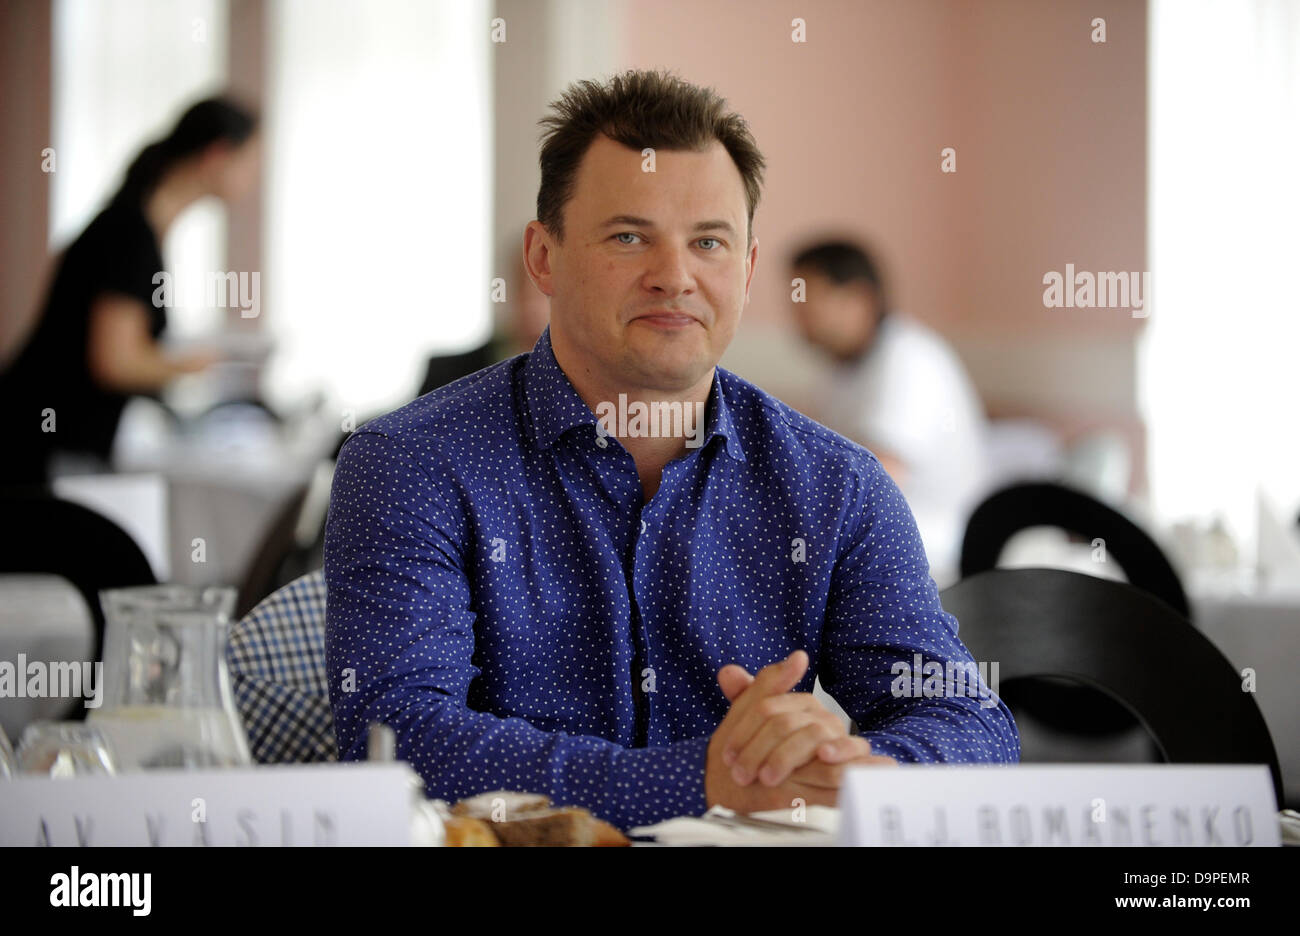 Soyuz crew commander Roman Yurievich Romanenko is are seen during a press conference in Teplice, Czech Republic, June 24, 2013. Roman Yurievich Romanenko arrived to rehabilitate to Teplice spa after 145 days in space. (CTK Photo/Libor Zavoral) Stock Photo